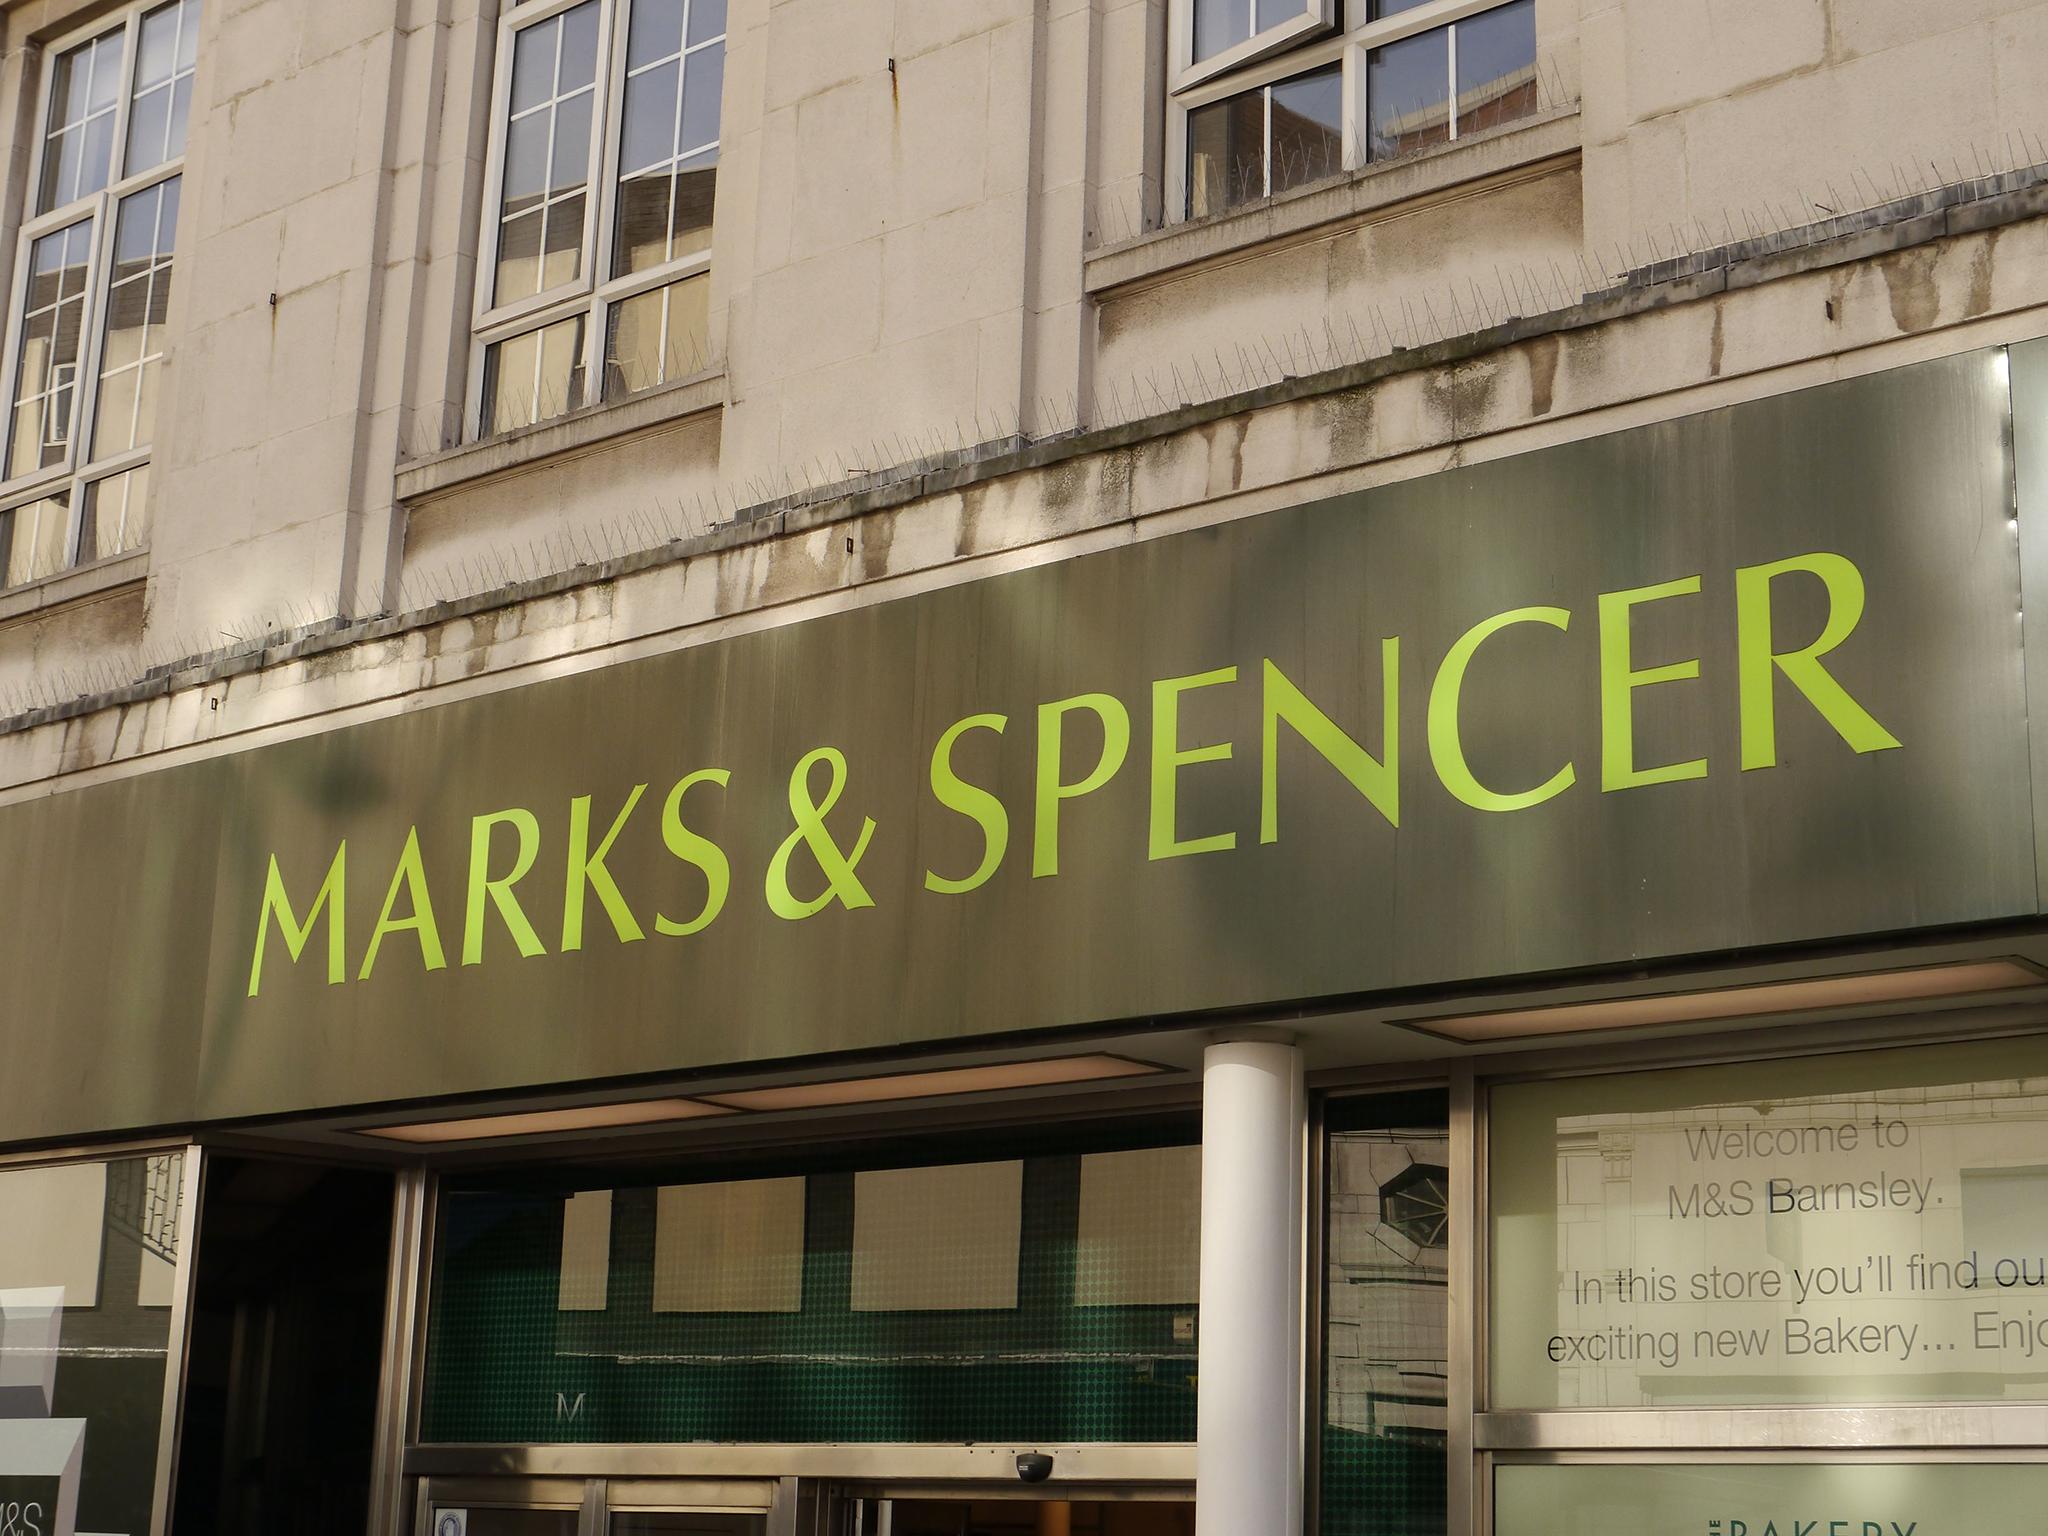 Chief executive Steve Rowe is set to announce the fate of its UK stores on 8 November, when M&S is expected to post lower profit and sales